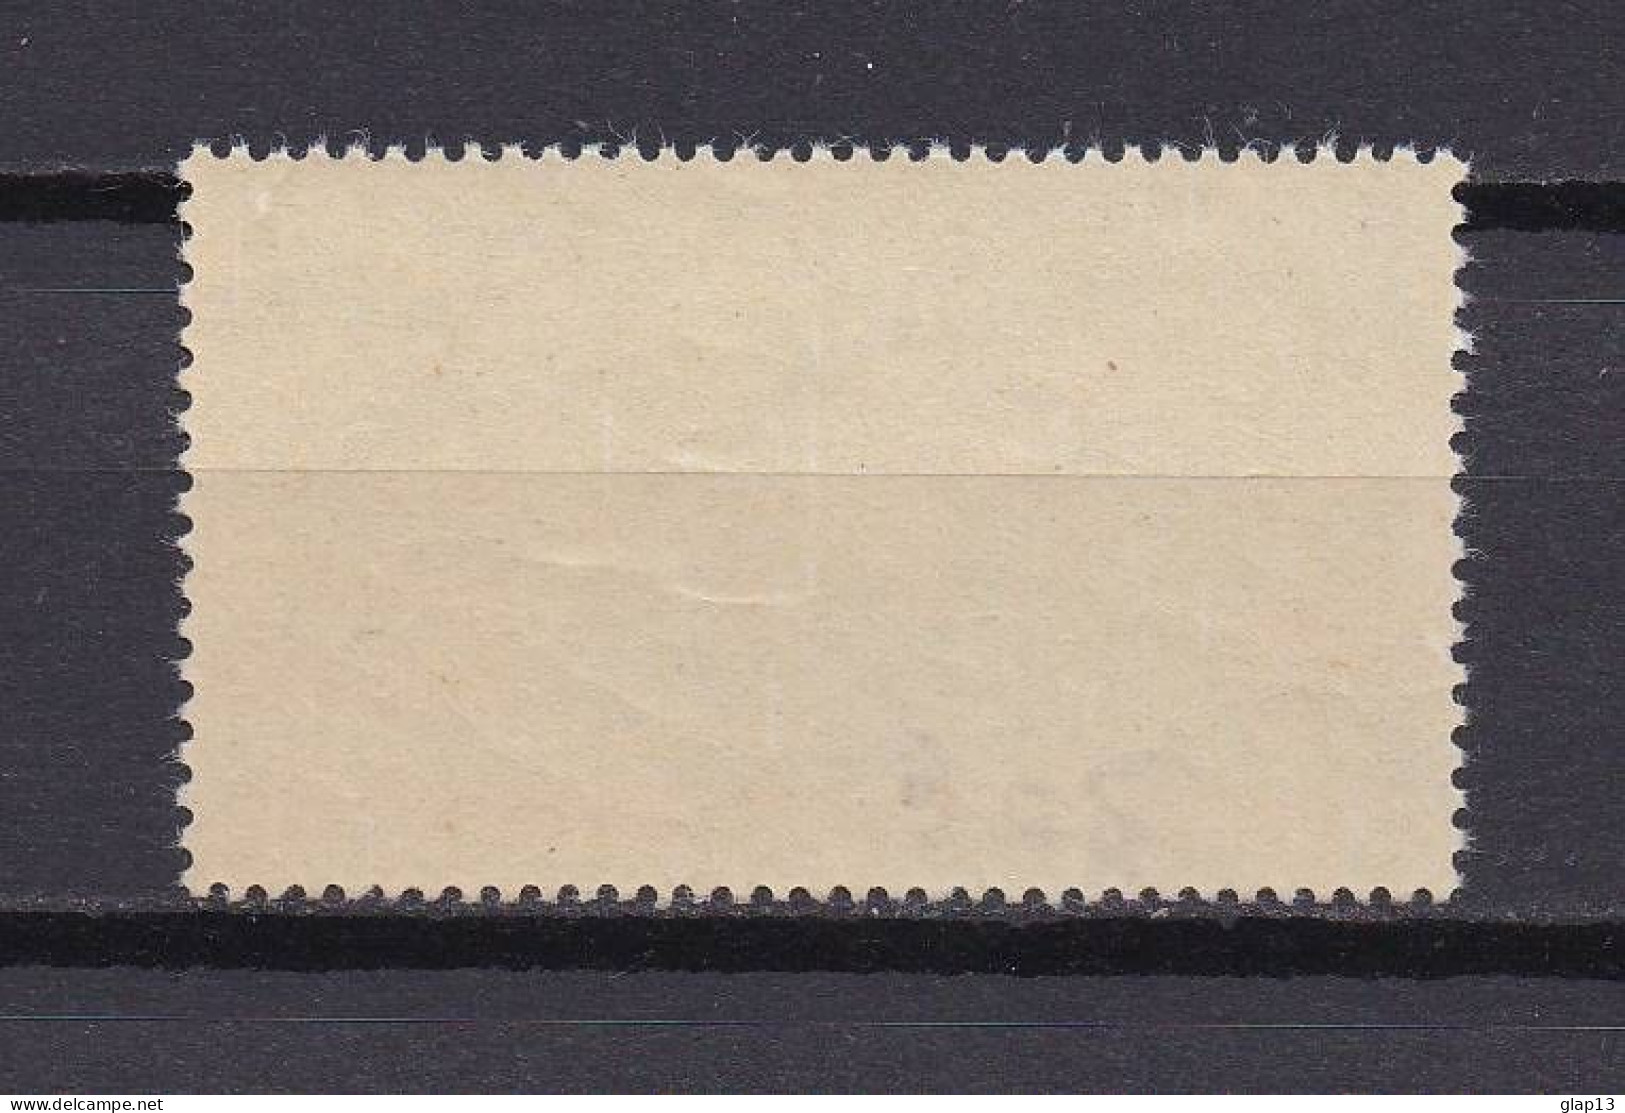 NOUVELLE-CALEDONIE 1962 TIMBRE N°305 NEUF AVEC CHARNIERE CONFERENCE - Nuevos